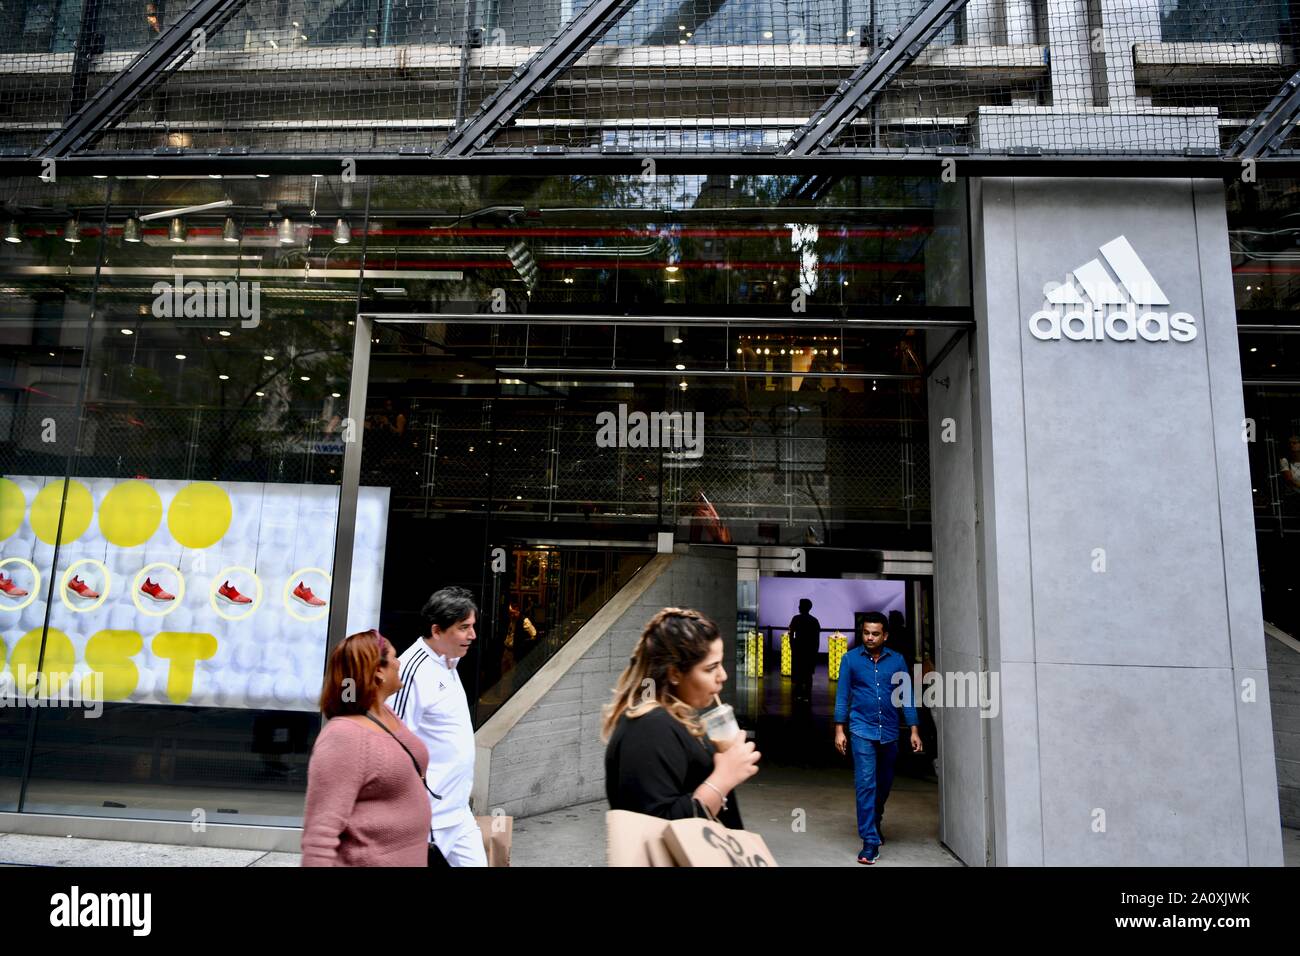 Adidas store nyc hi-res photography images - Alamy